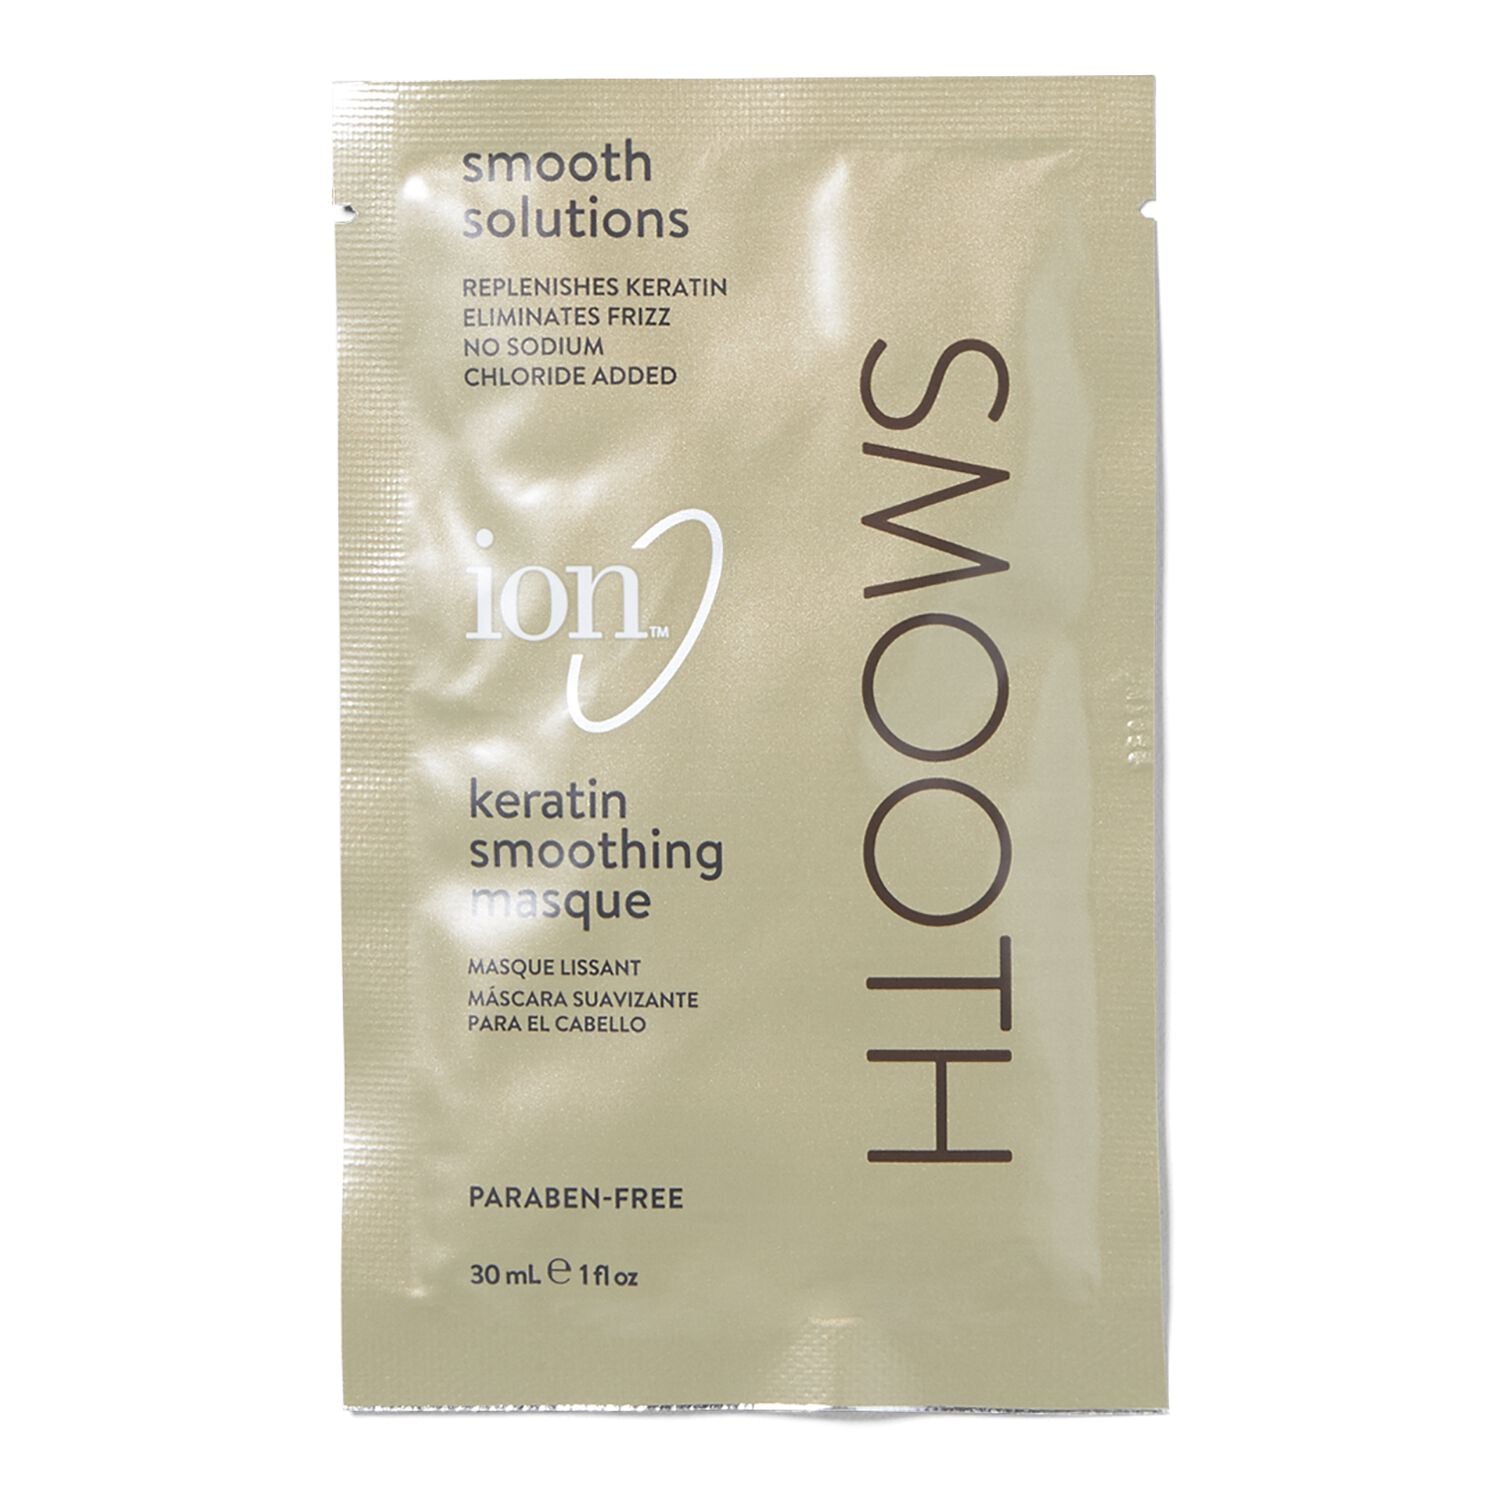 Smooth Solutions  by   ion Keratin Smoothing Masque Packette